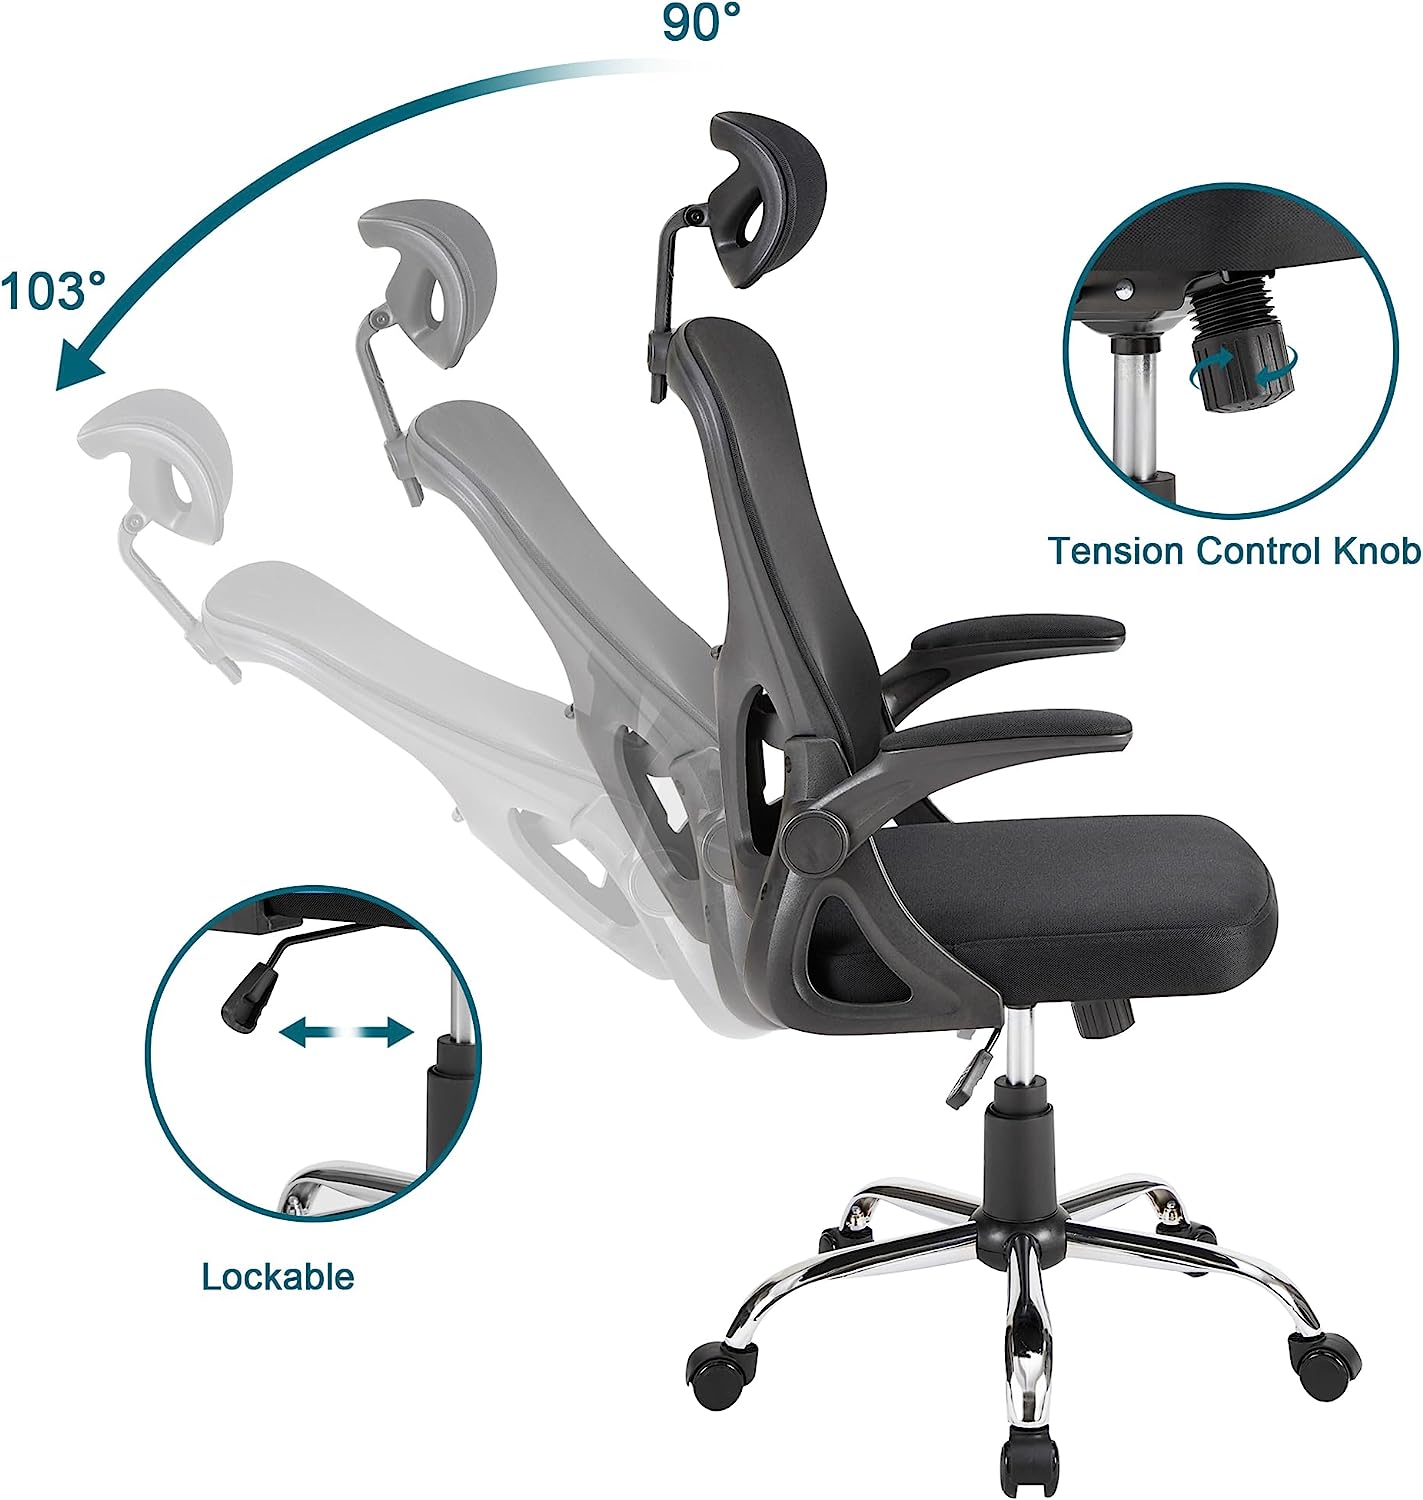 VECELO Mid-Back Swivel Ergonomic Office Chair with Adjustable Arms Mes